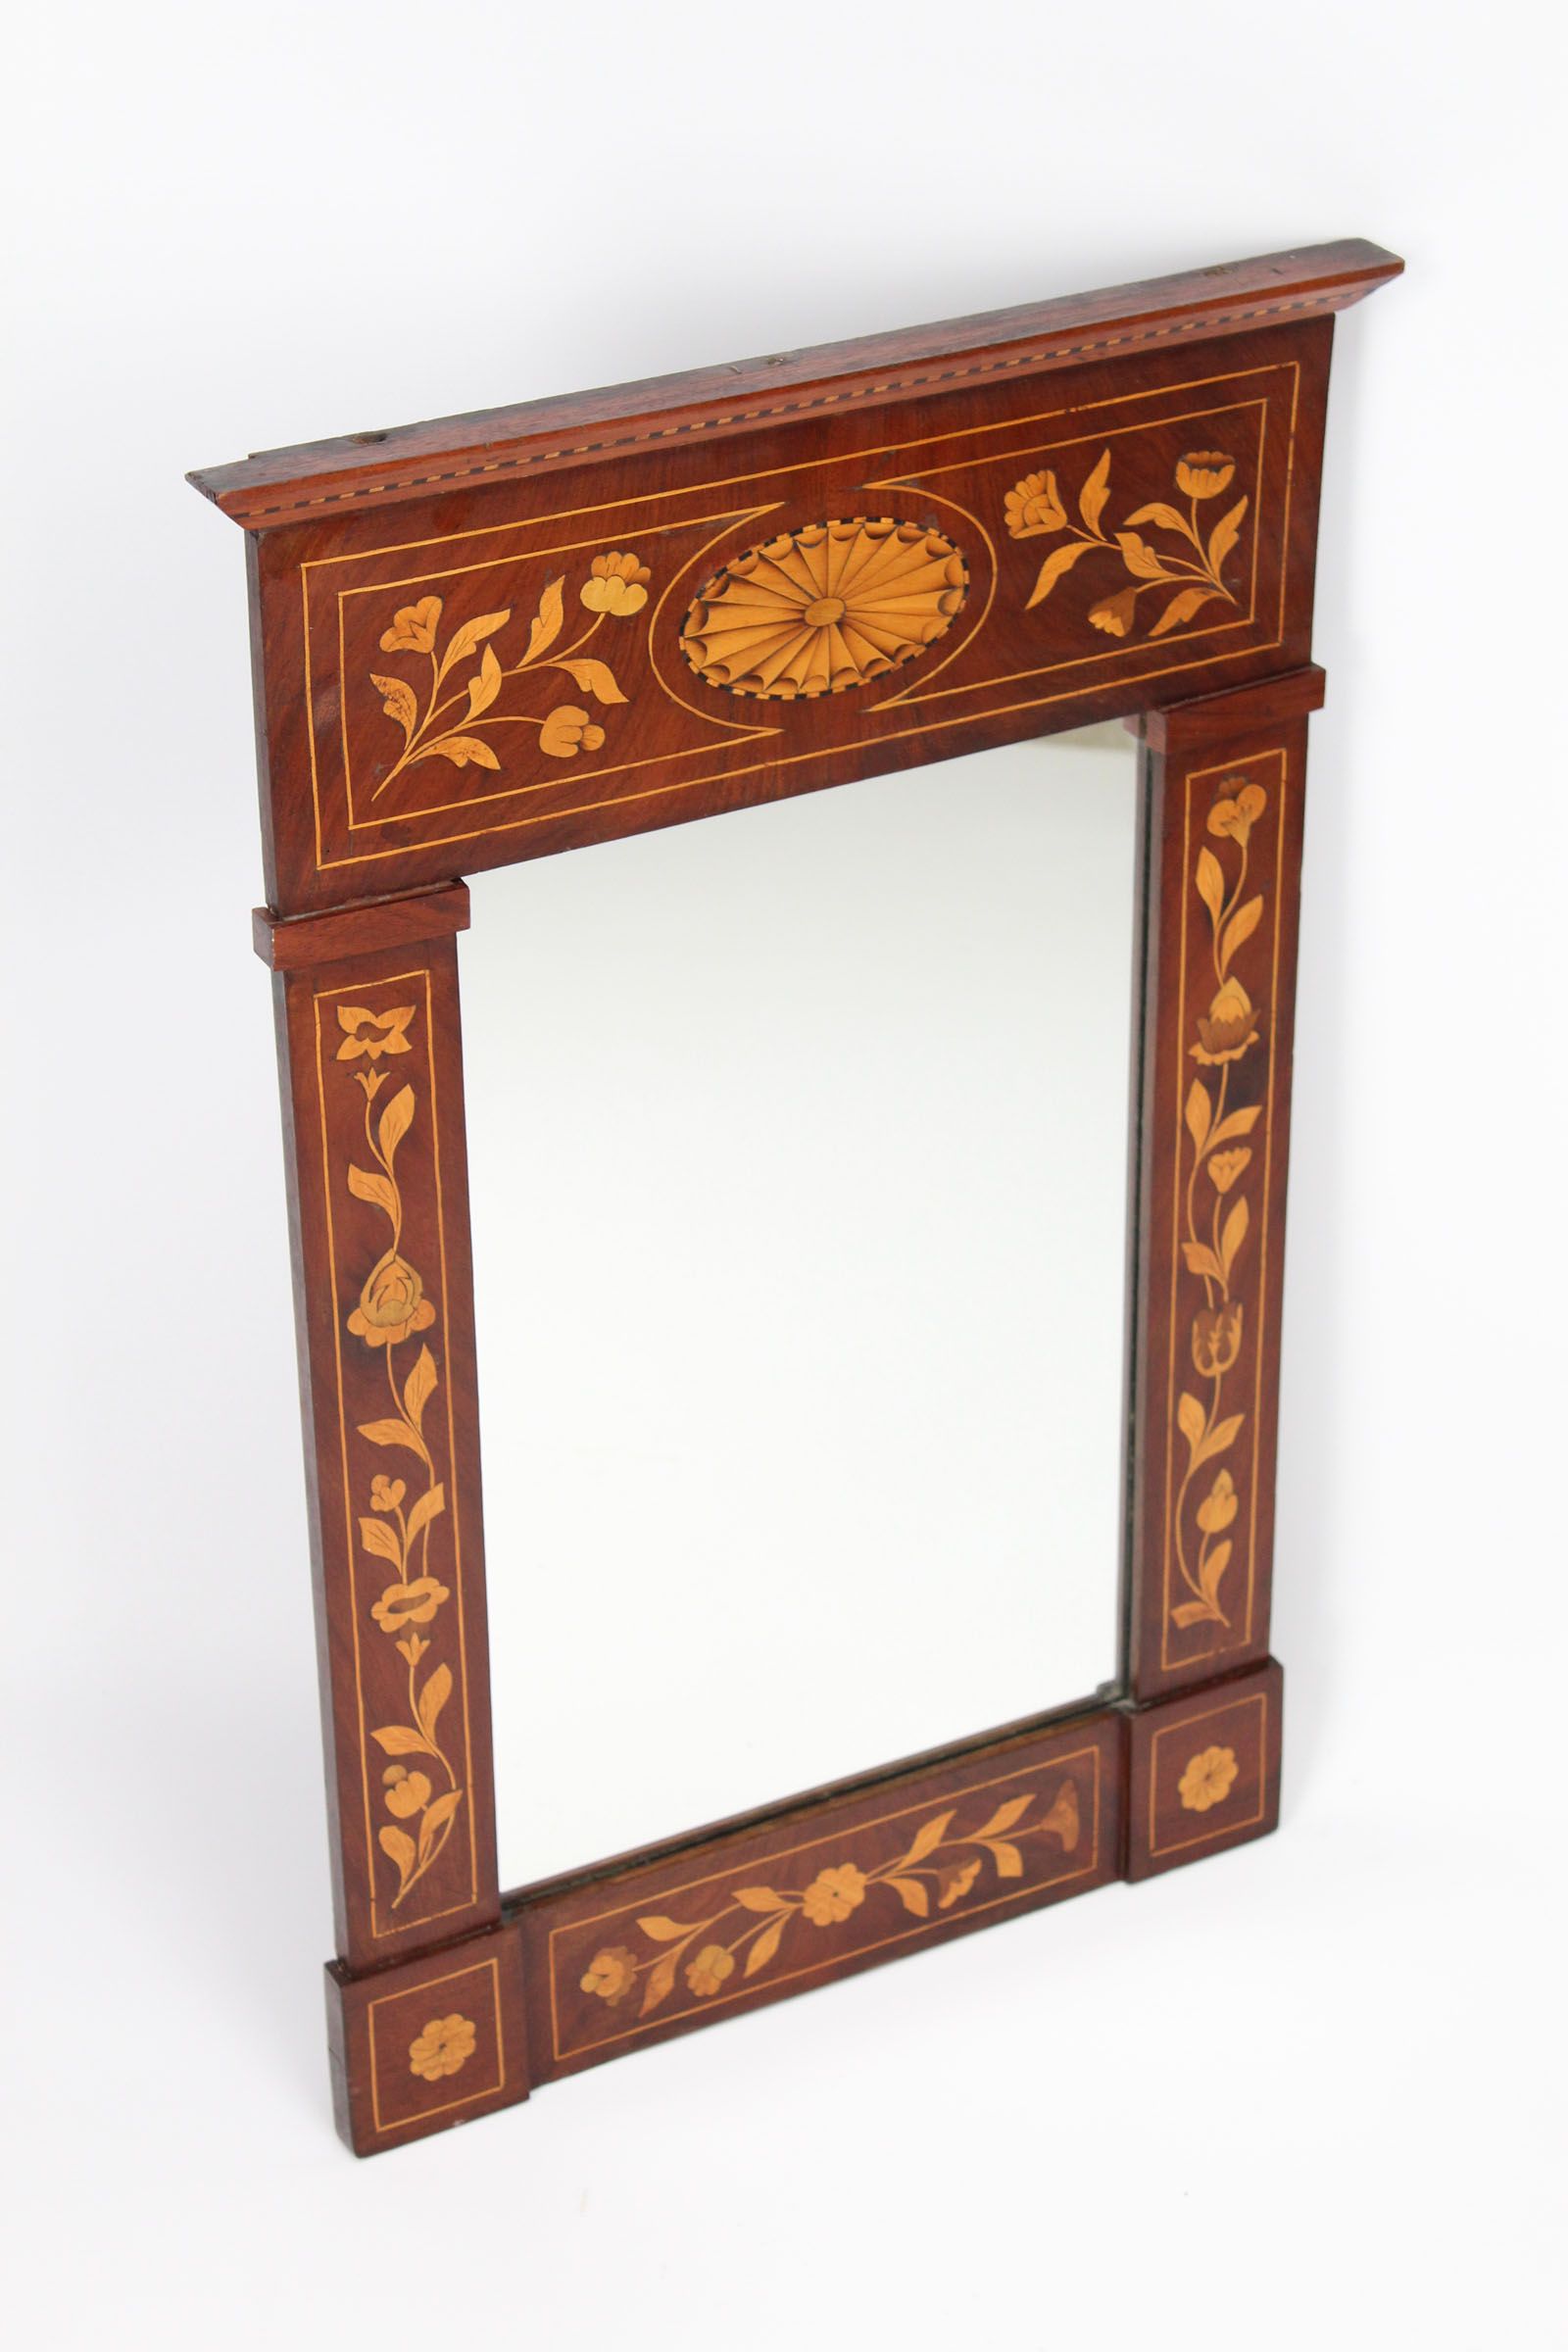 19th Century Dutch Inlaid Mahogany Mirror Intended For Most Up To Date Mahogany Accent Wall Mirrors (View 2 of 15)